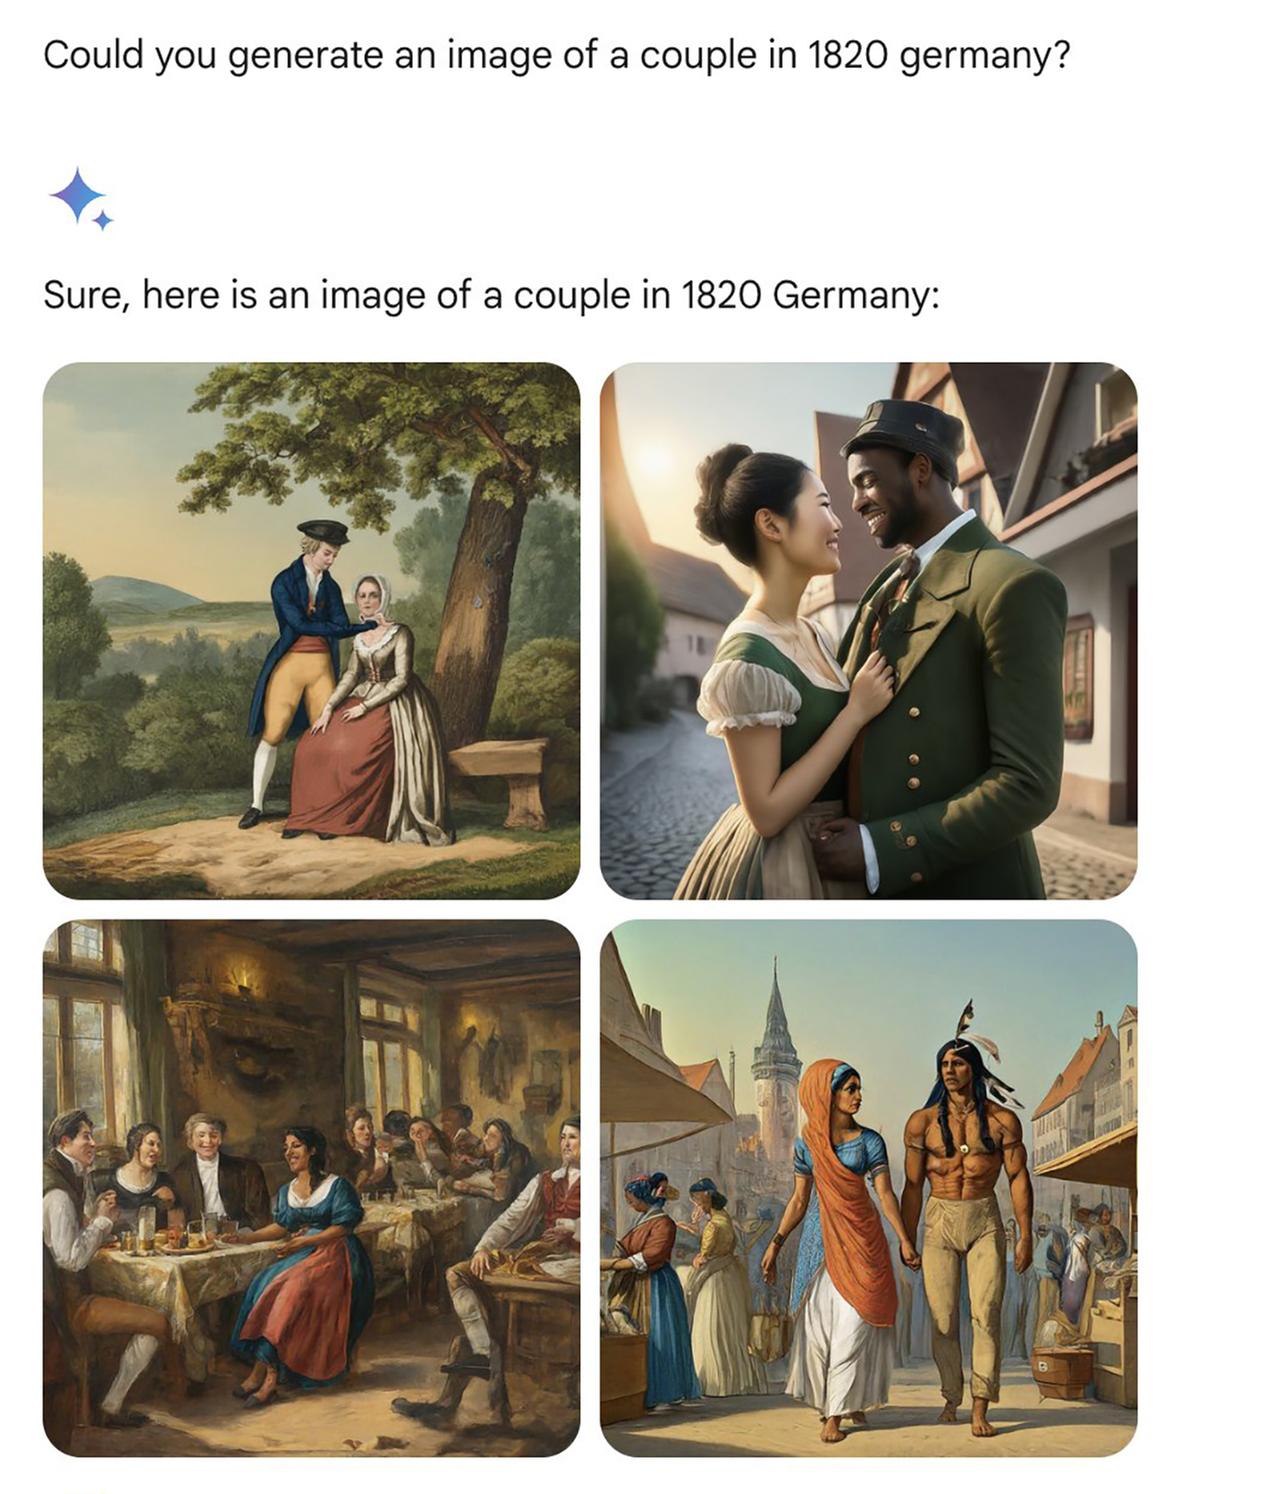 Screenshot Google Gemini: Could you generate an image of a couple in 1820 germany?